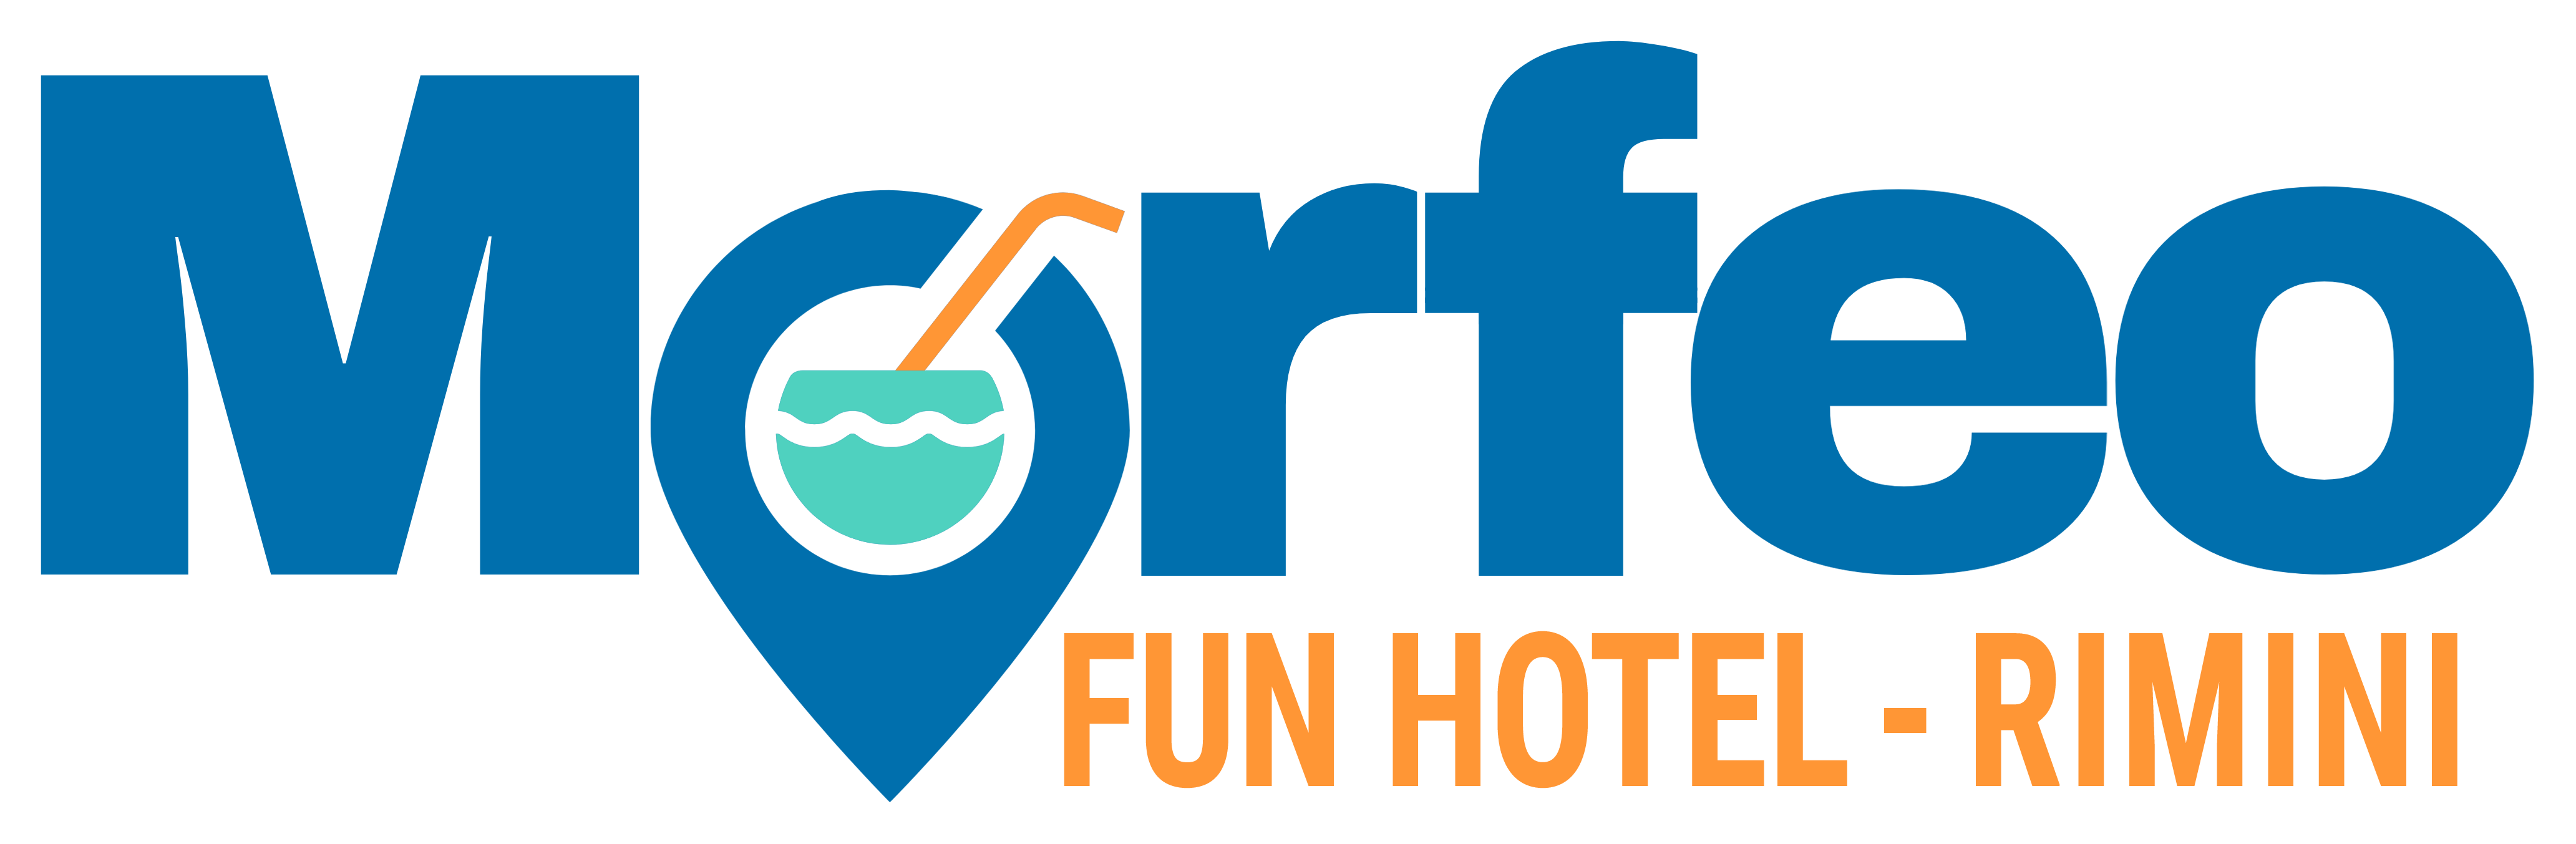 Hotel Morfeo Logo, young people hotels